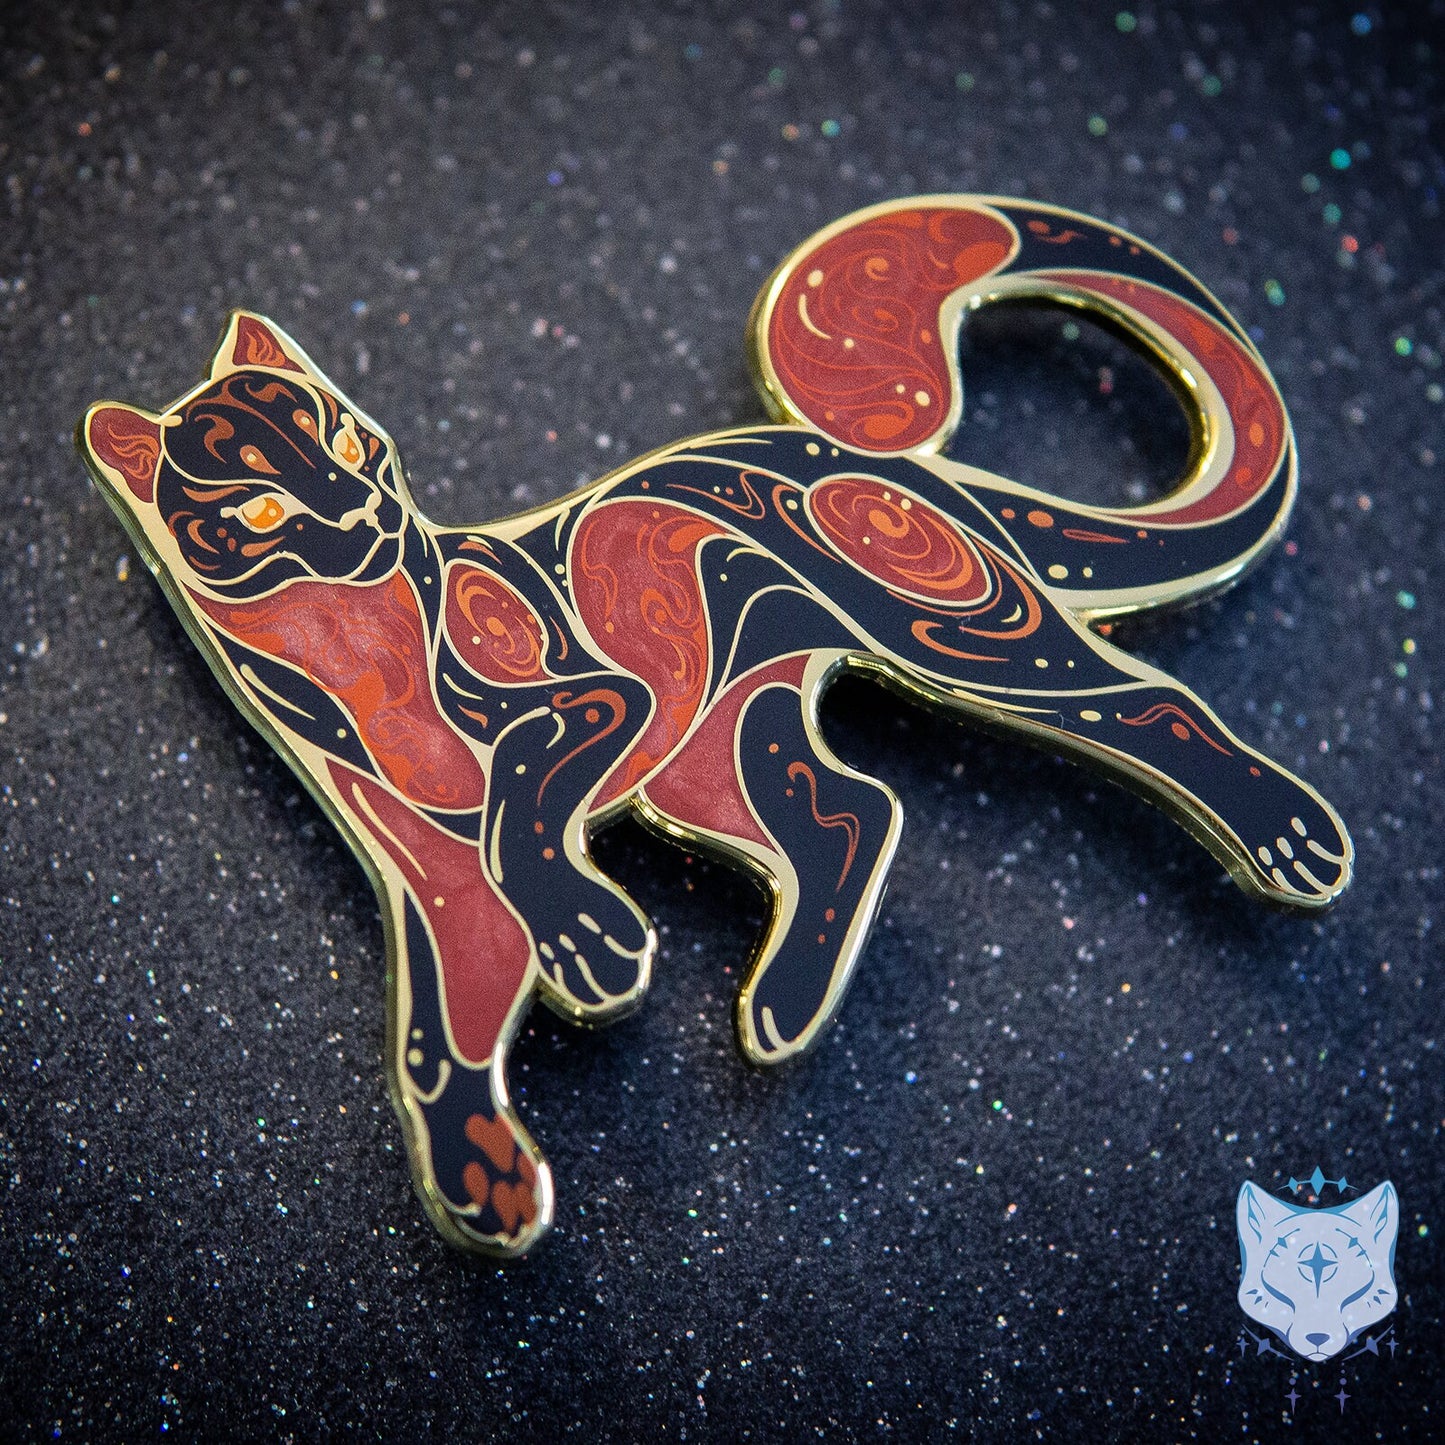 Jupiter Cat Planet Pin *LIMITED EDITION* -  69.85mm / 2.75" Space Cat enamel pin. Will not be restocked once stock is sold.